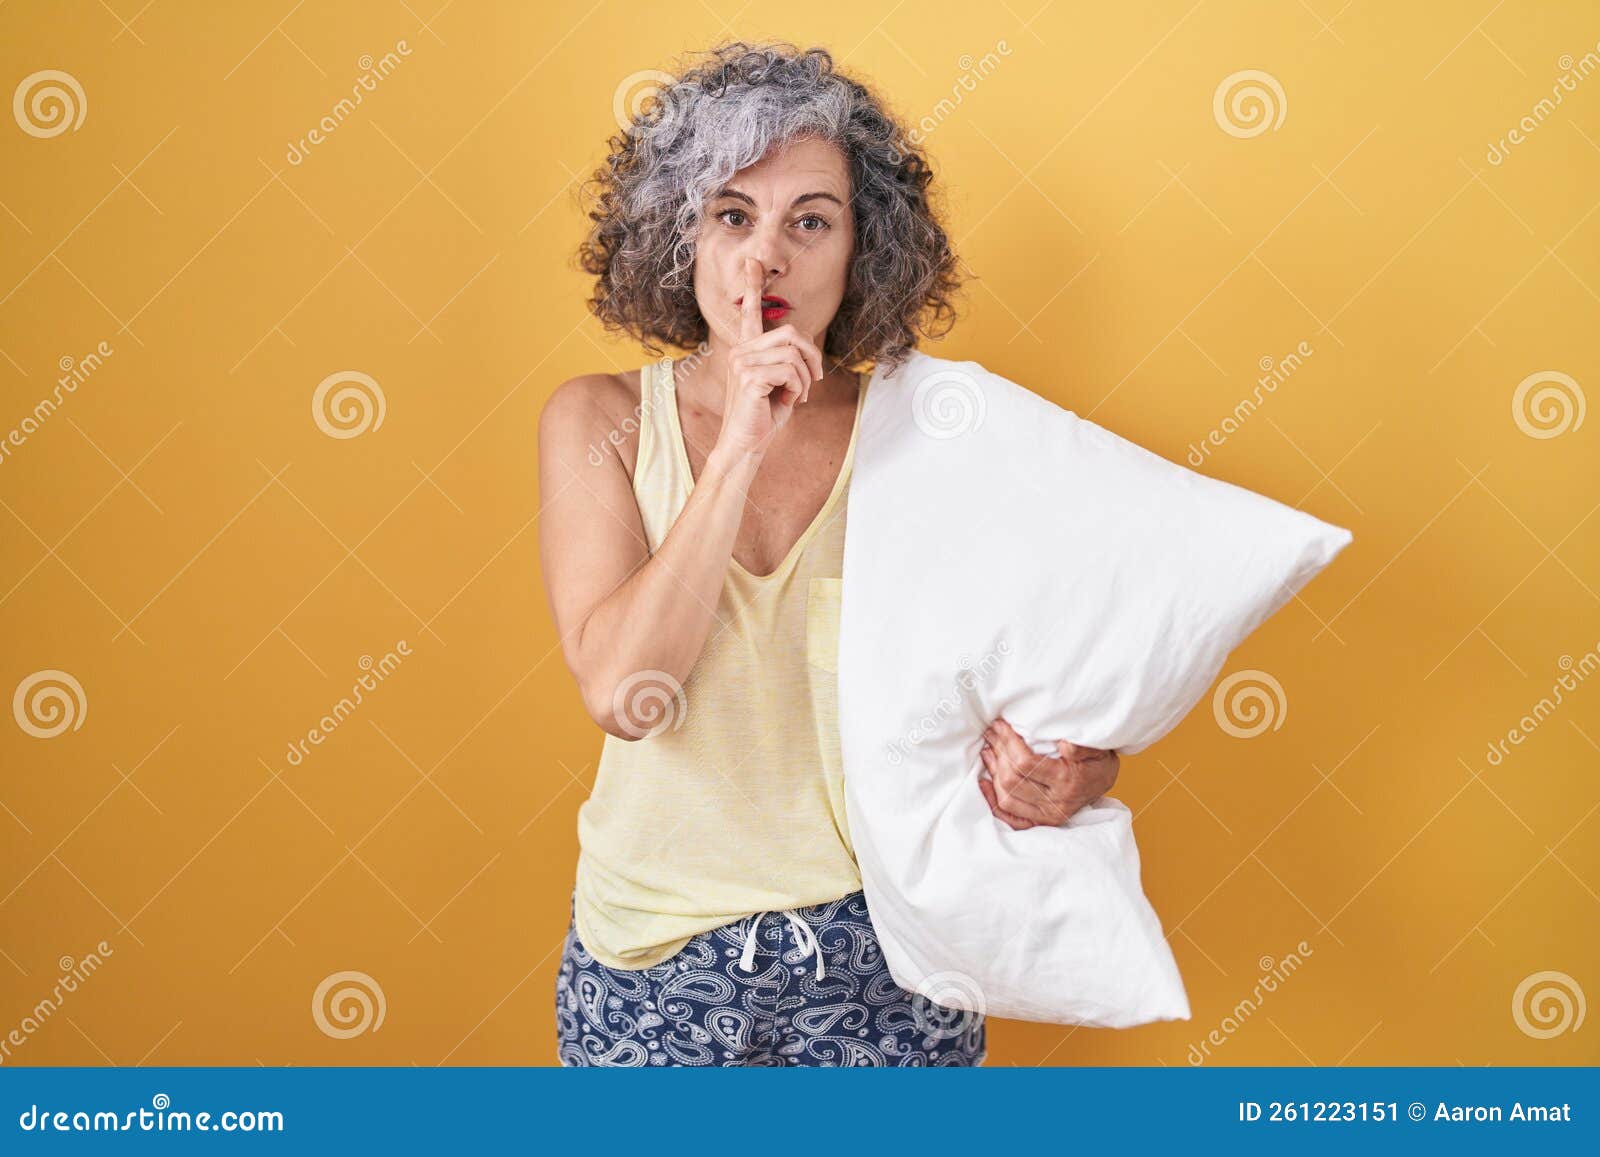 middle age woman with grey hair wearing pijama hugging pillow asking to be quiet with finger on lips